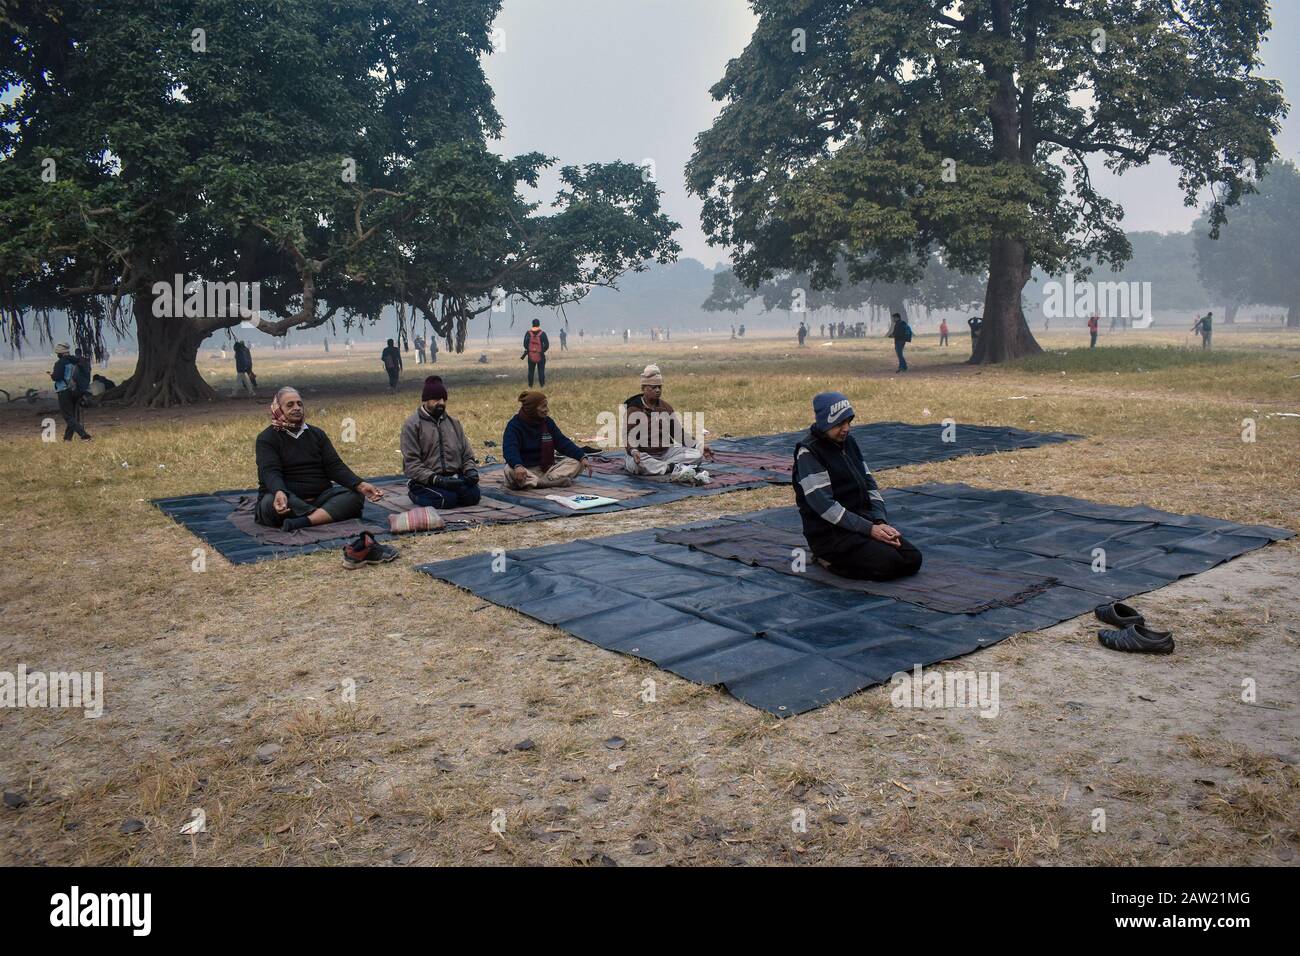 Peoples are doing Yoga on an early winter morning in Kolkata, India. Stock Photo